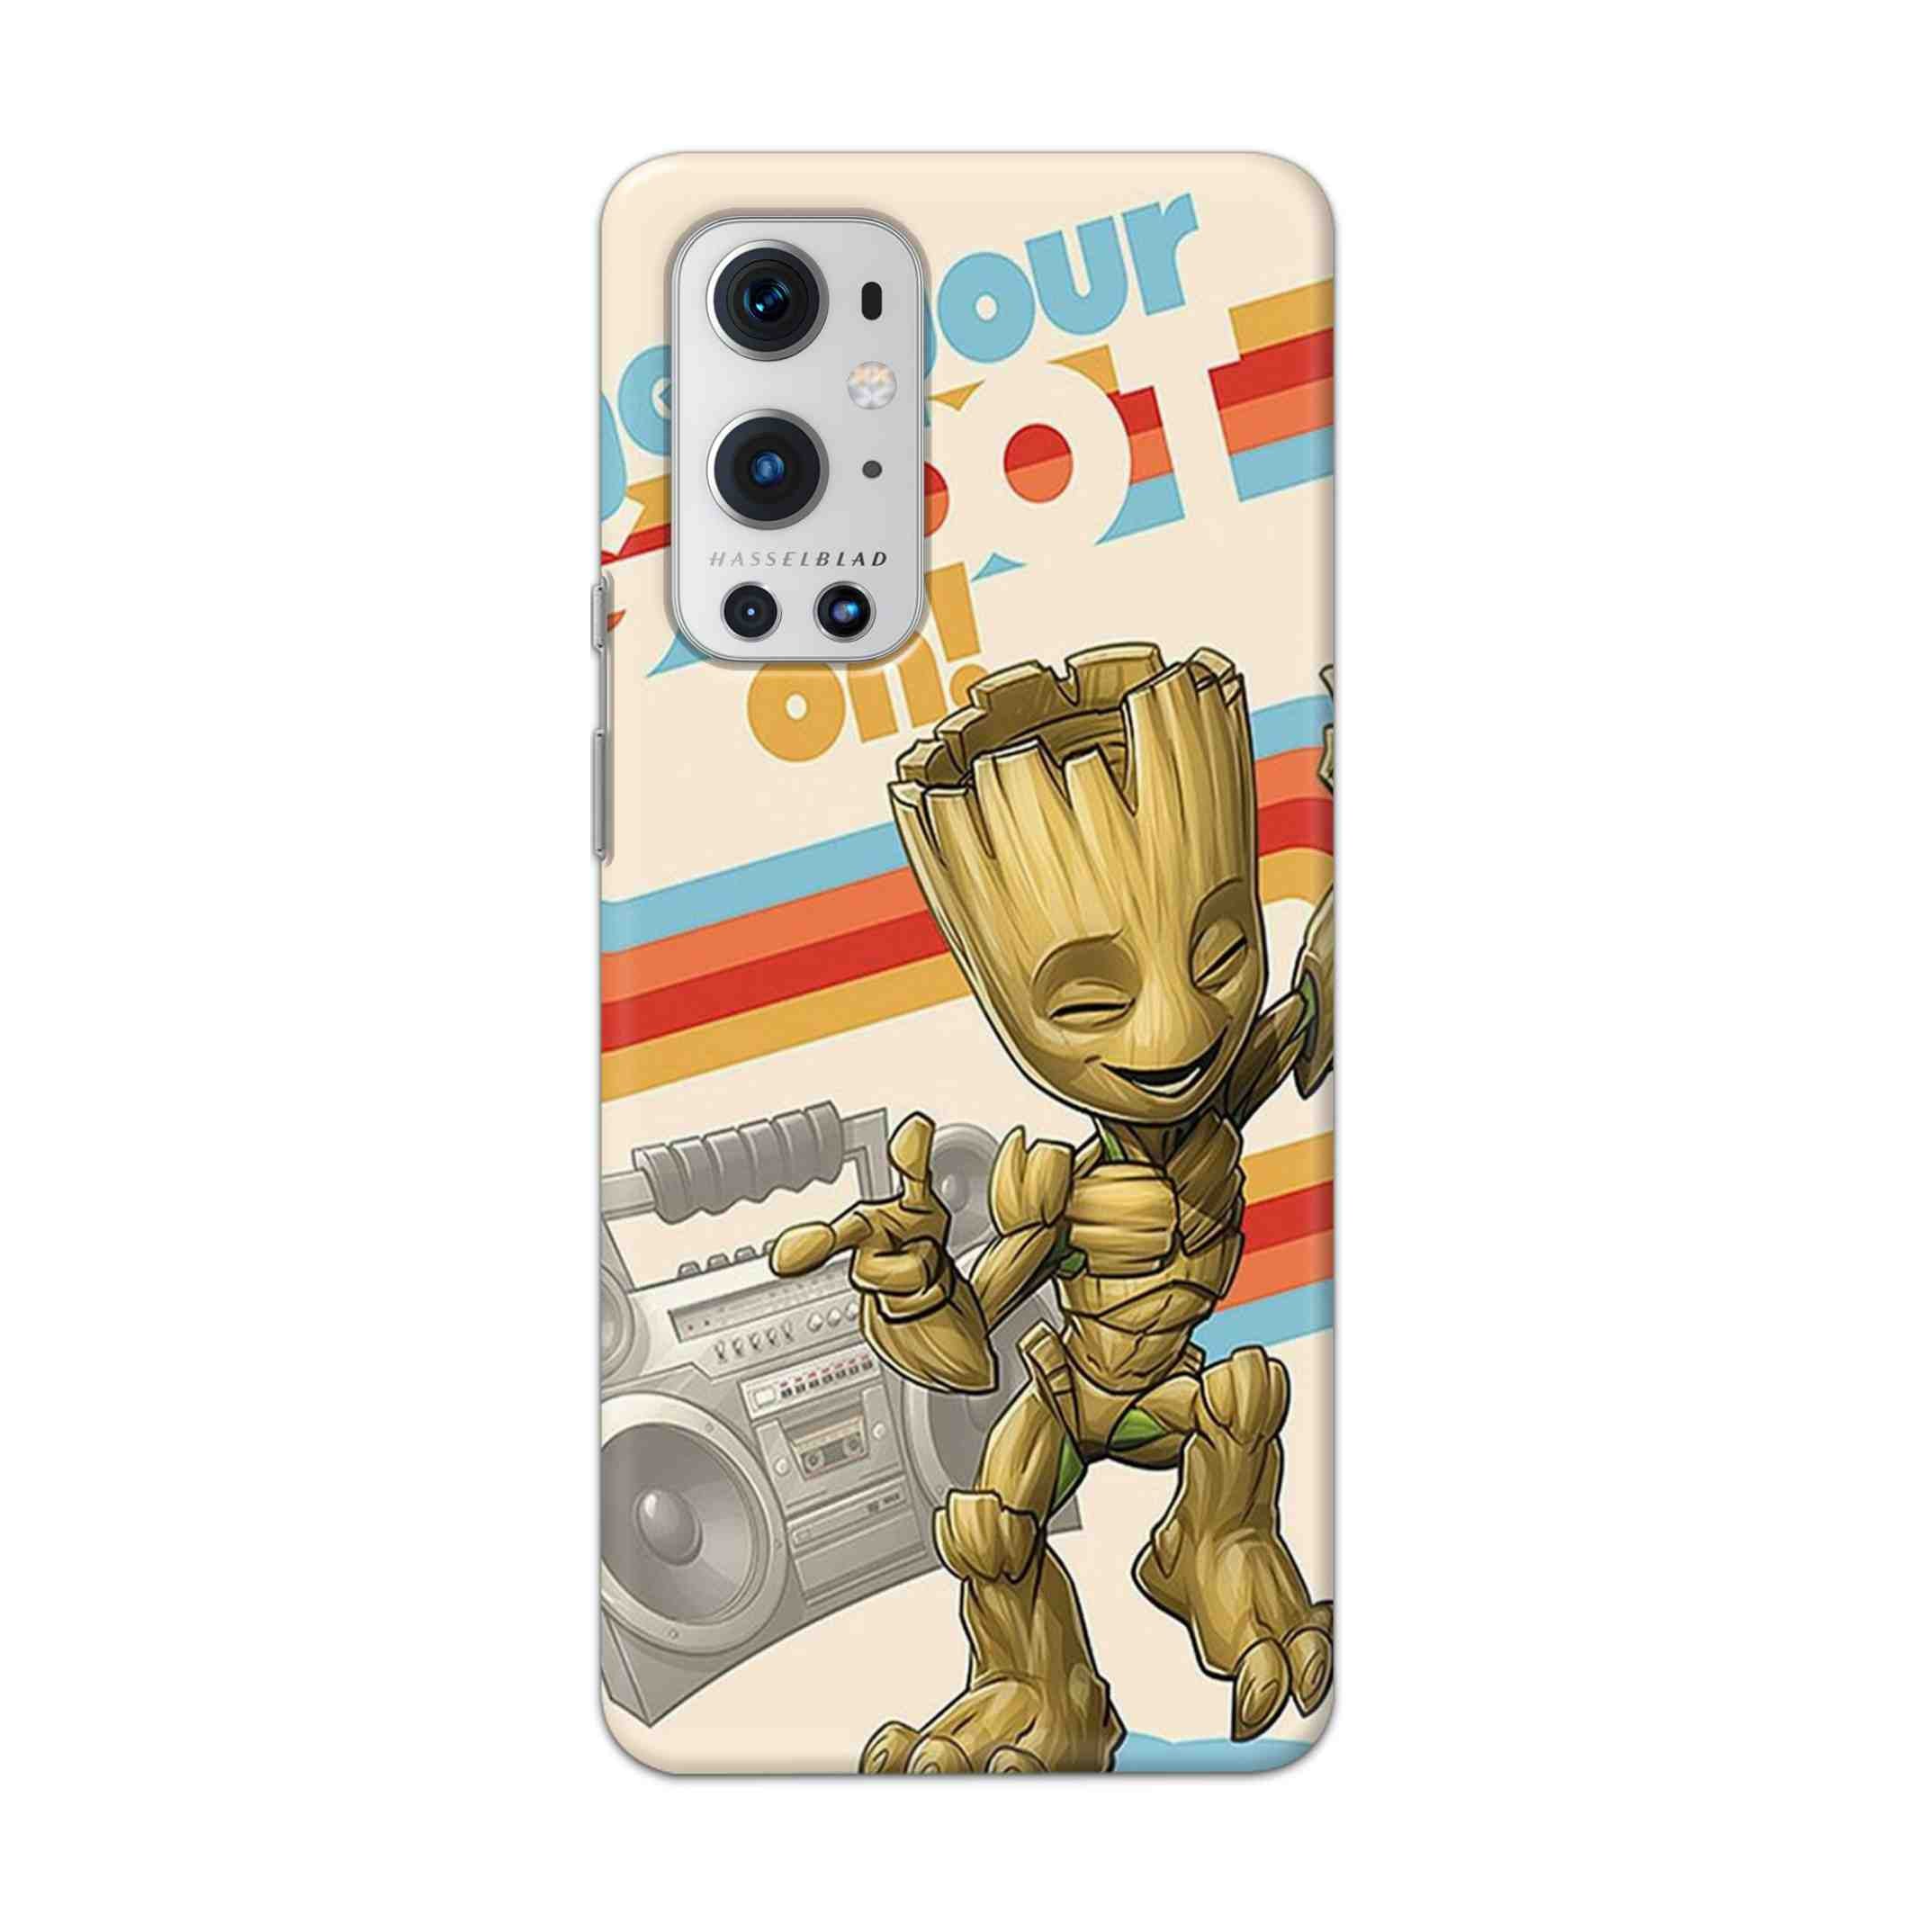 Buy Groot Hard Back Mobile Phone Case Cover For OnePlus 9 Pro Online